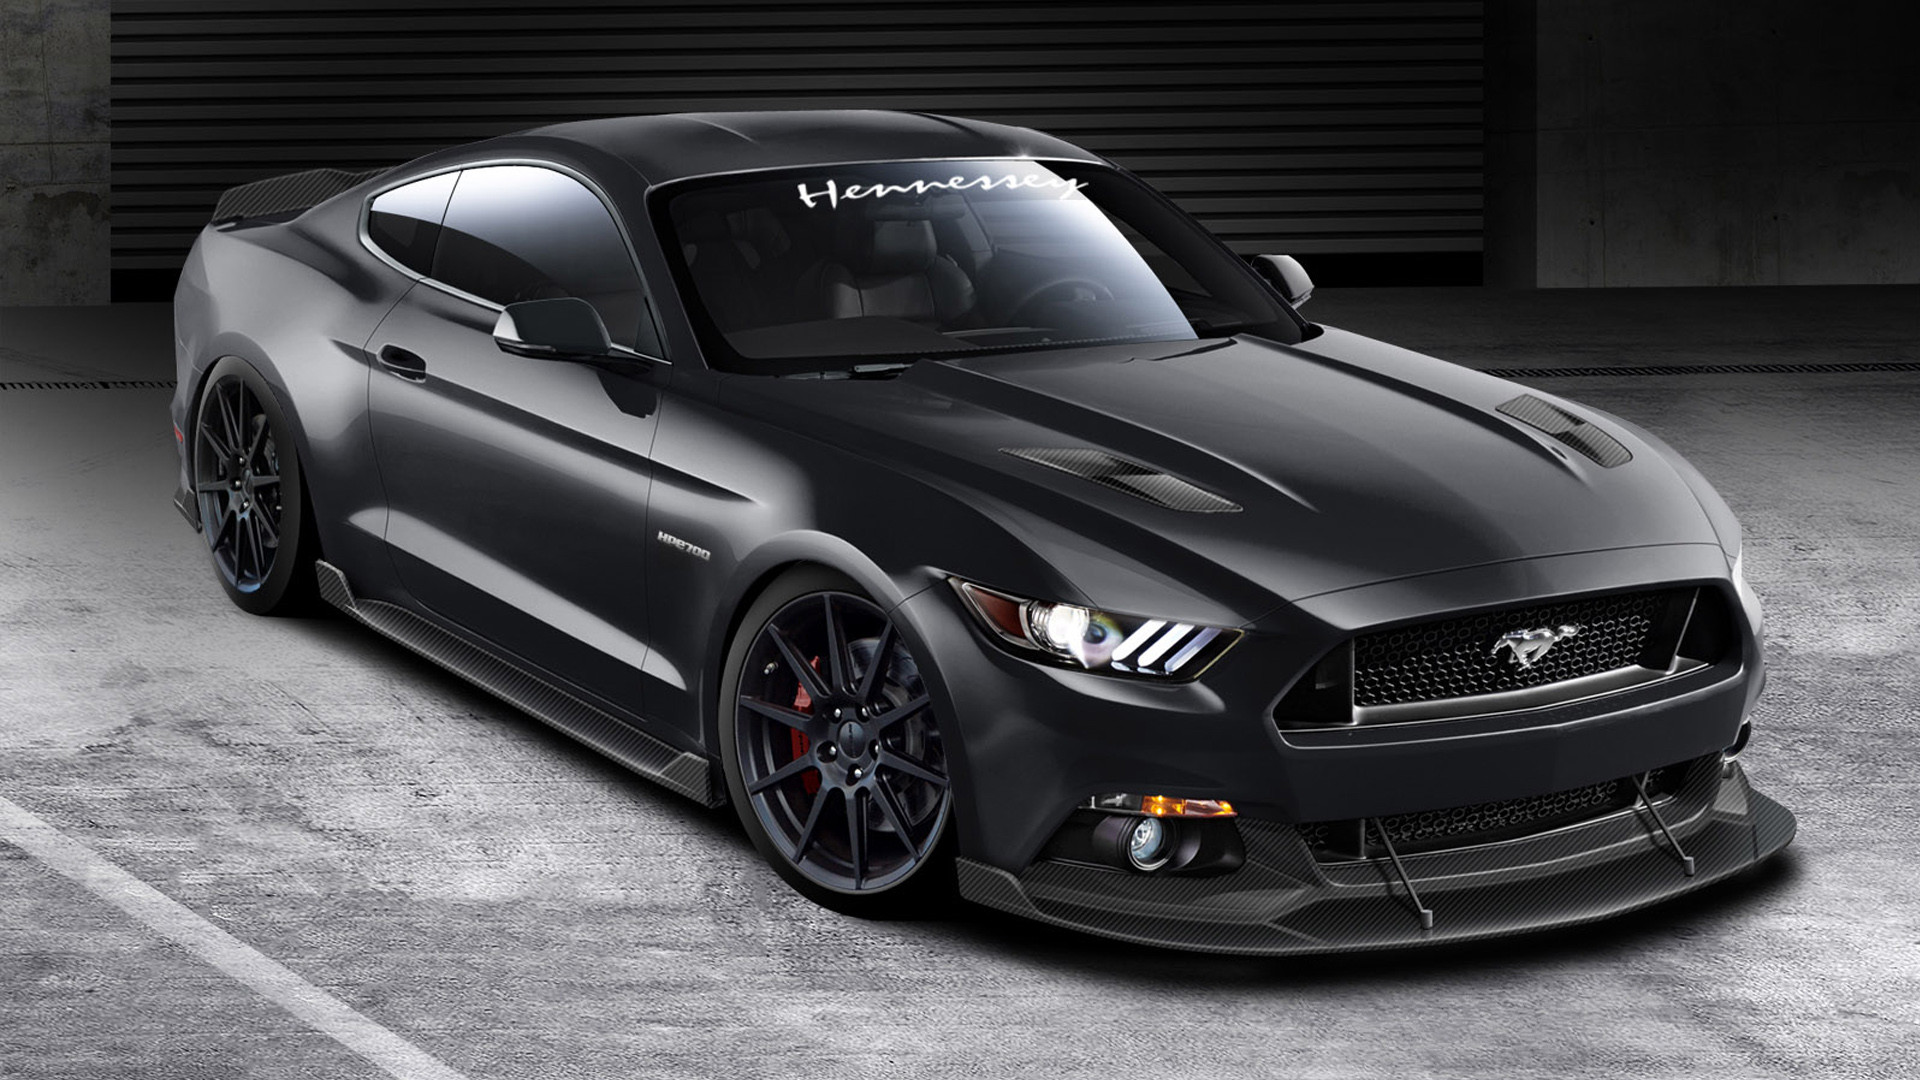 1920x1080, 2015 Hennessey Ford Mustang Gt Wallpaper - Ford Mustang Gt 2015 Black - HD Wallpaper 